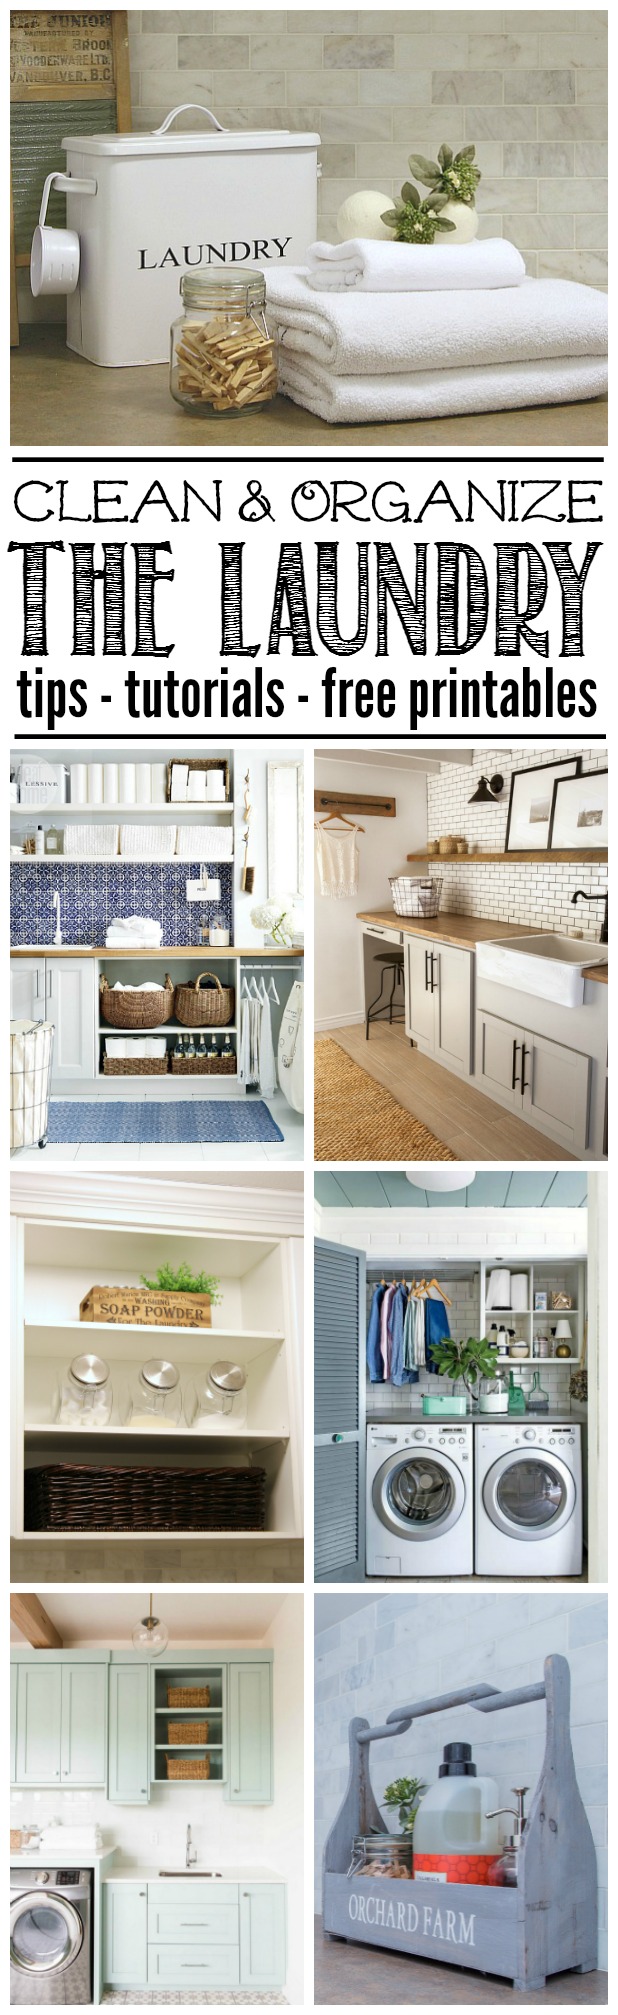 Great tips and design ideas to help you create a beautiful and functional laundry room. Free printables included to help keep you on track! 